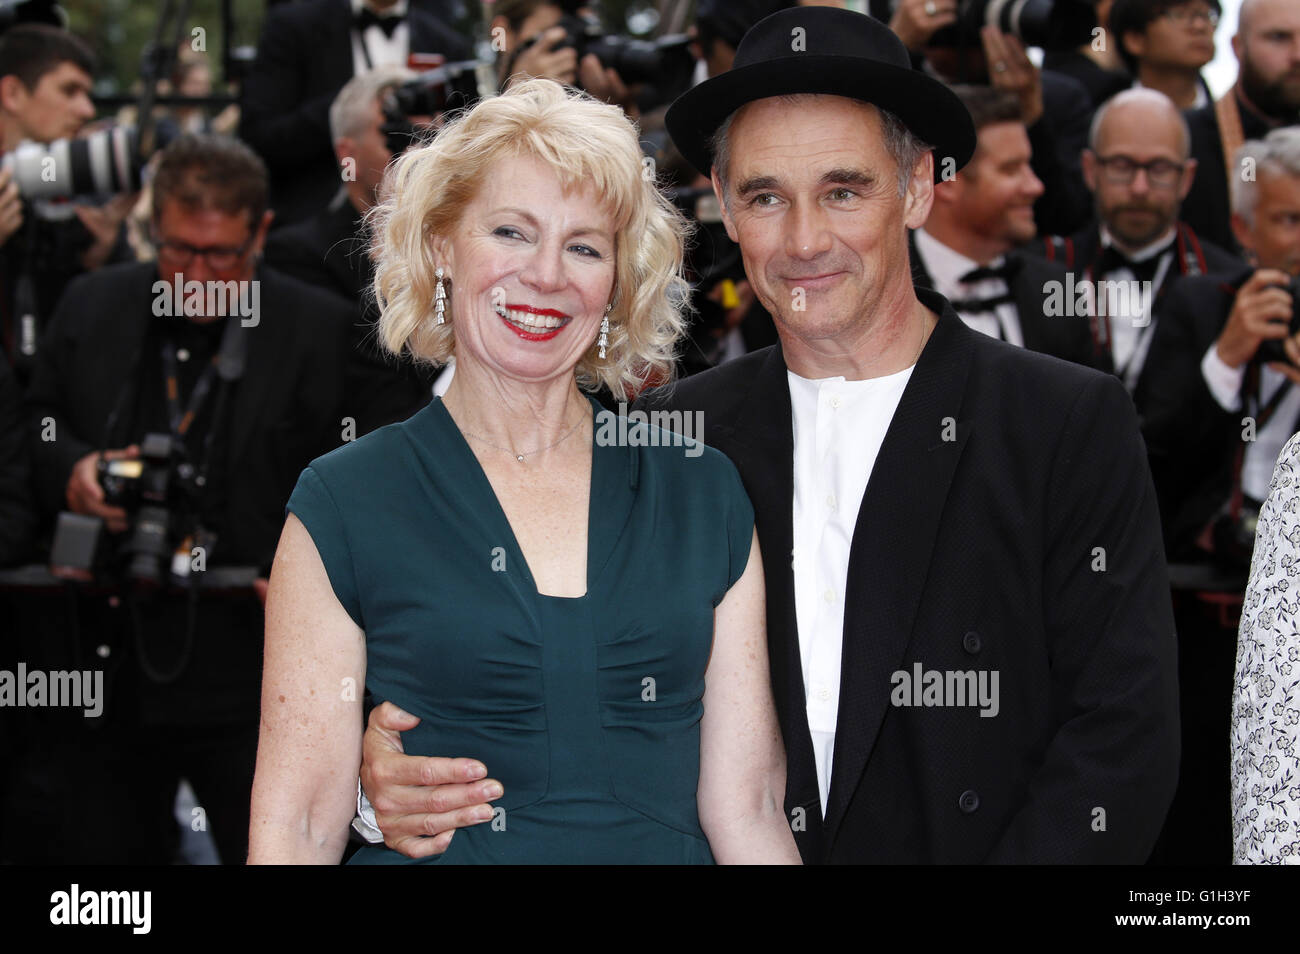 Claire van Kampen and Mark Rylance attending the 'The BFG' premiere during the 69th Cannes Film Festival at the Palais des Festivals in Cannes on May 14, 2016 | usage worldwide Stock Photo